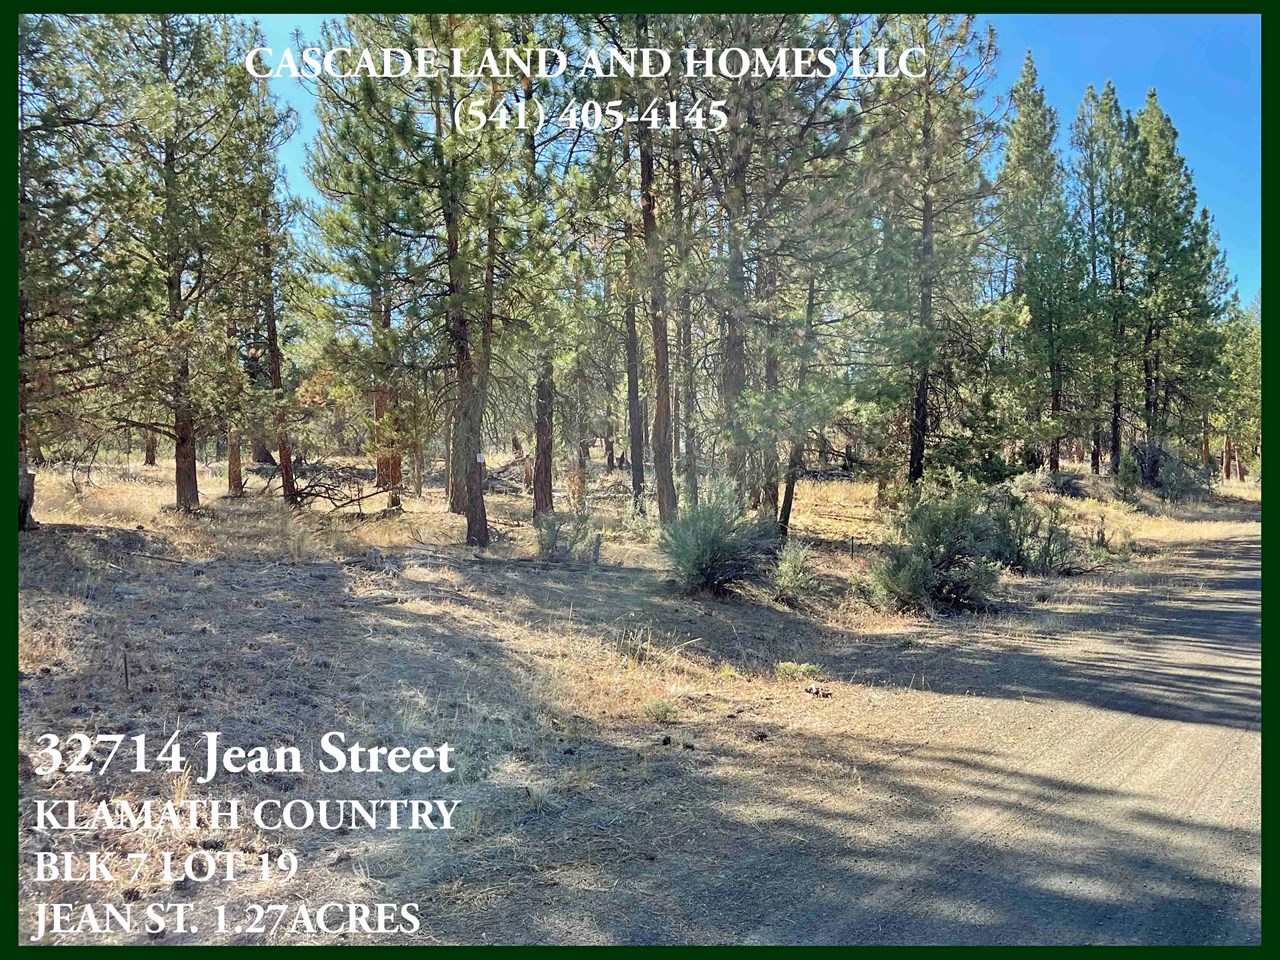 the mix of mature and younger pine trees allows for the perfect mix of light to shine through. there are many areas on the property that would make a perfect homesite!